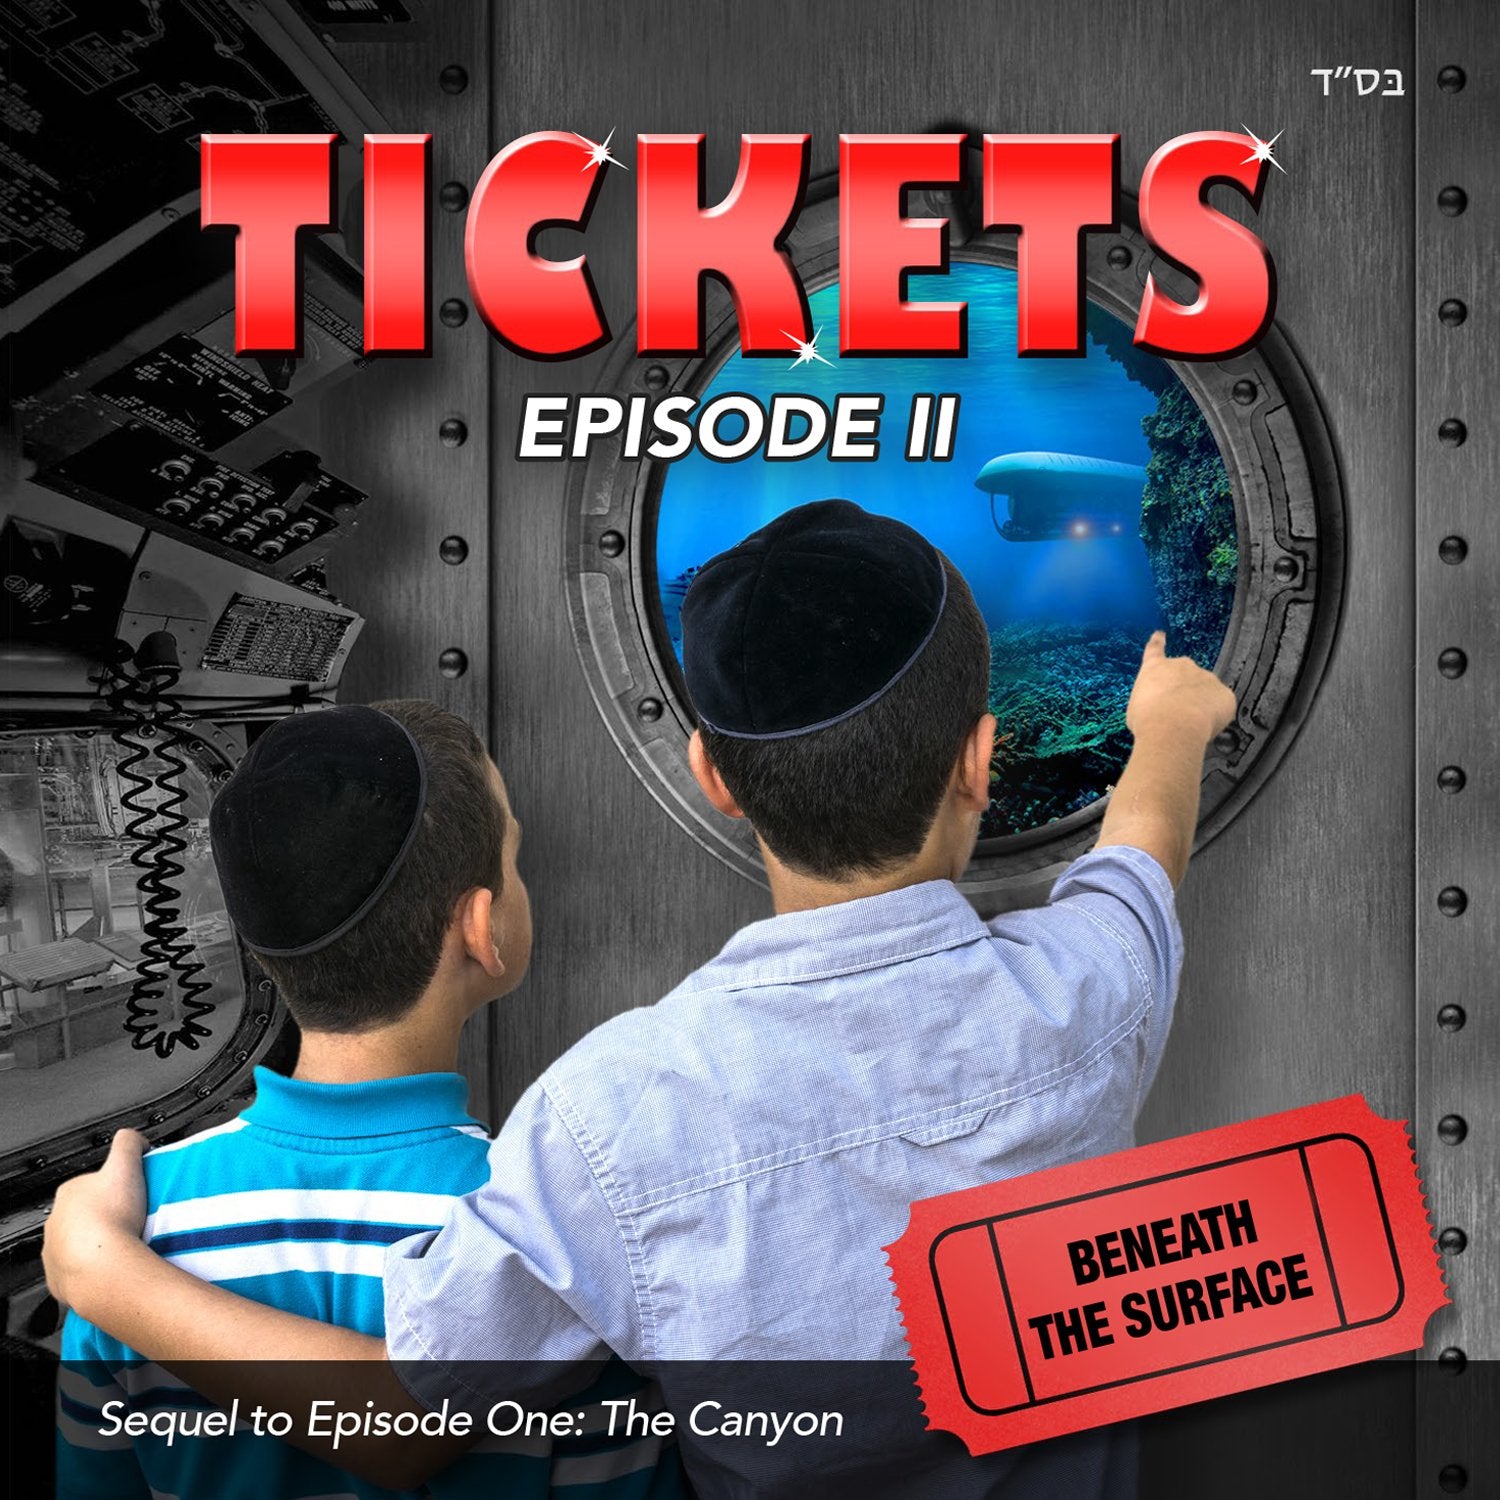 Tickets Episode II - Beneath The Surface